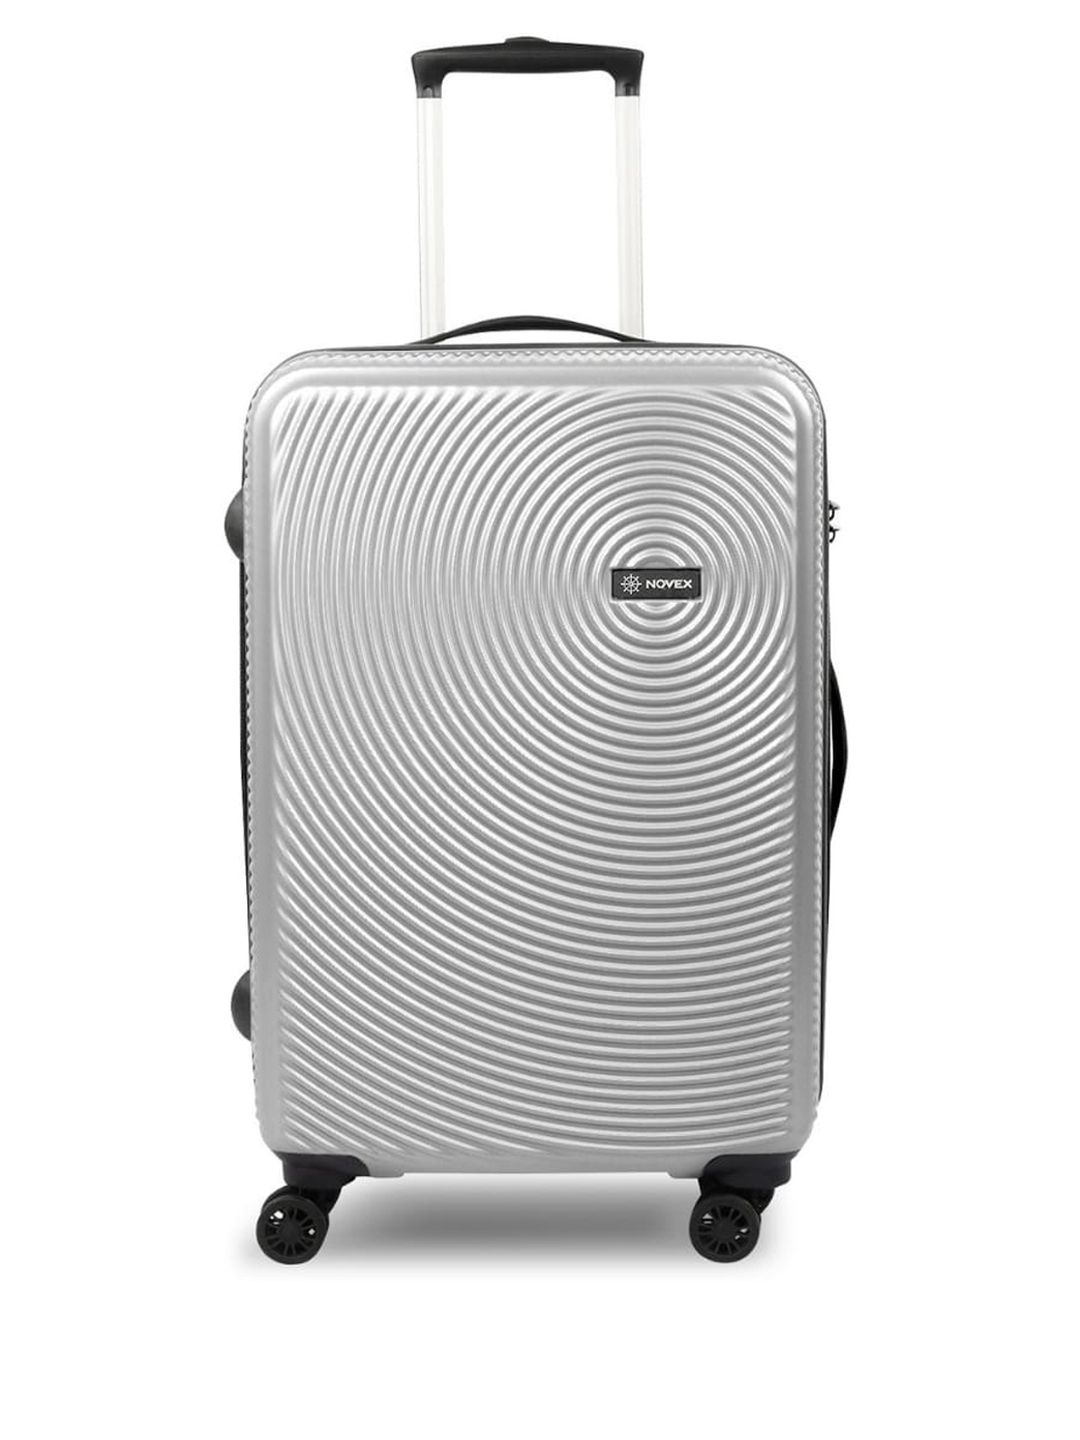 NOVEX Silver-Toned Textured Hard-Sided Medium Suitcase Trolley Bag Price in India